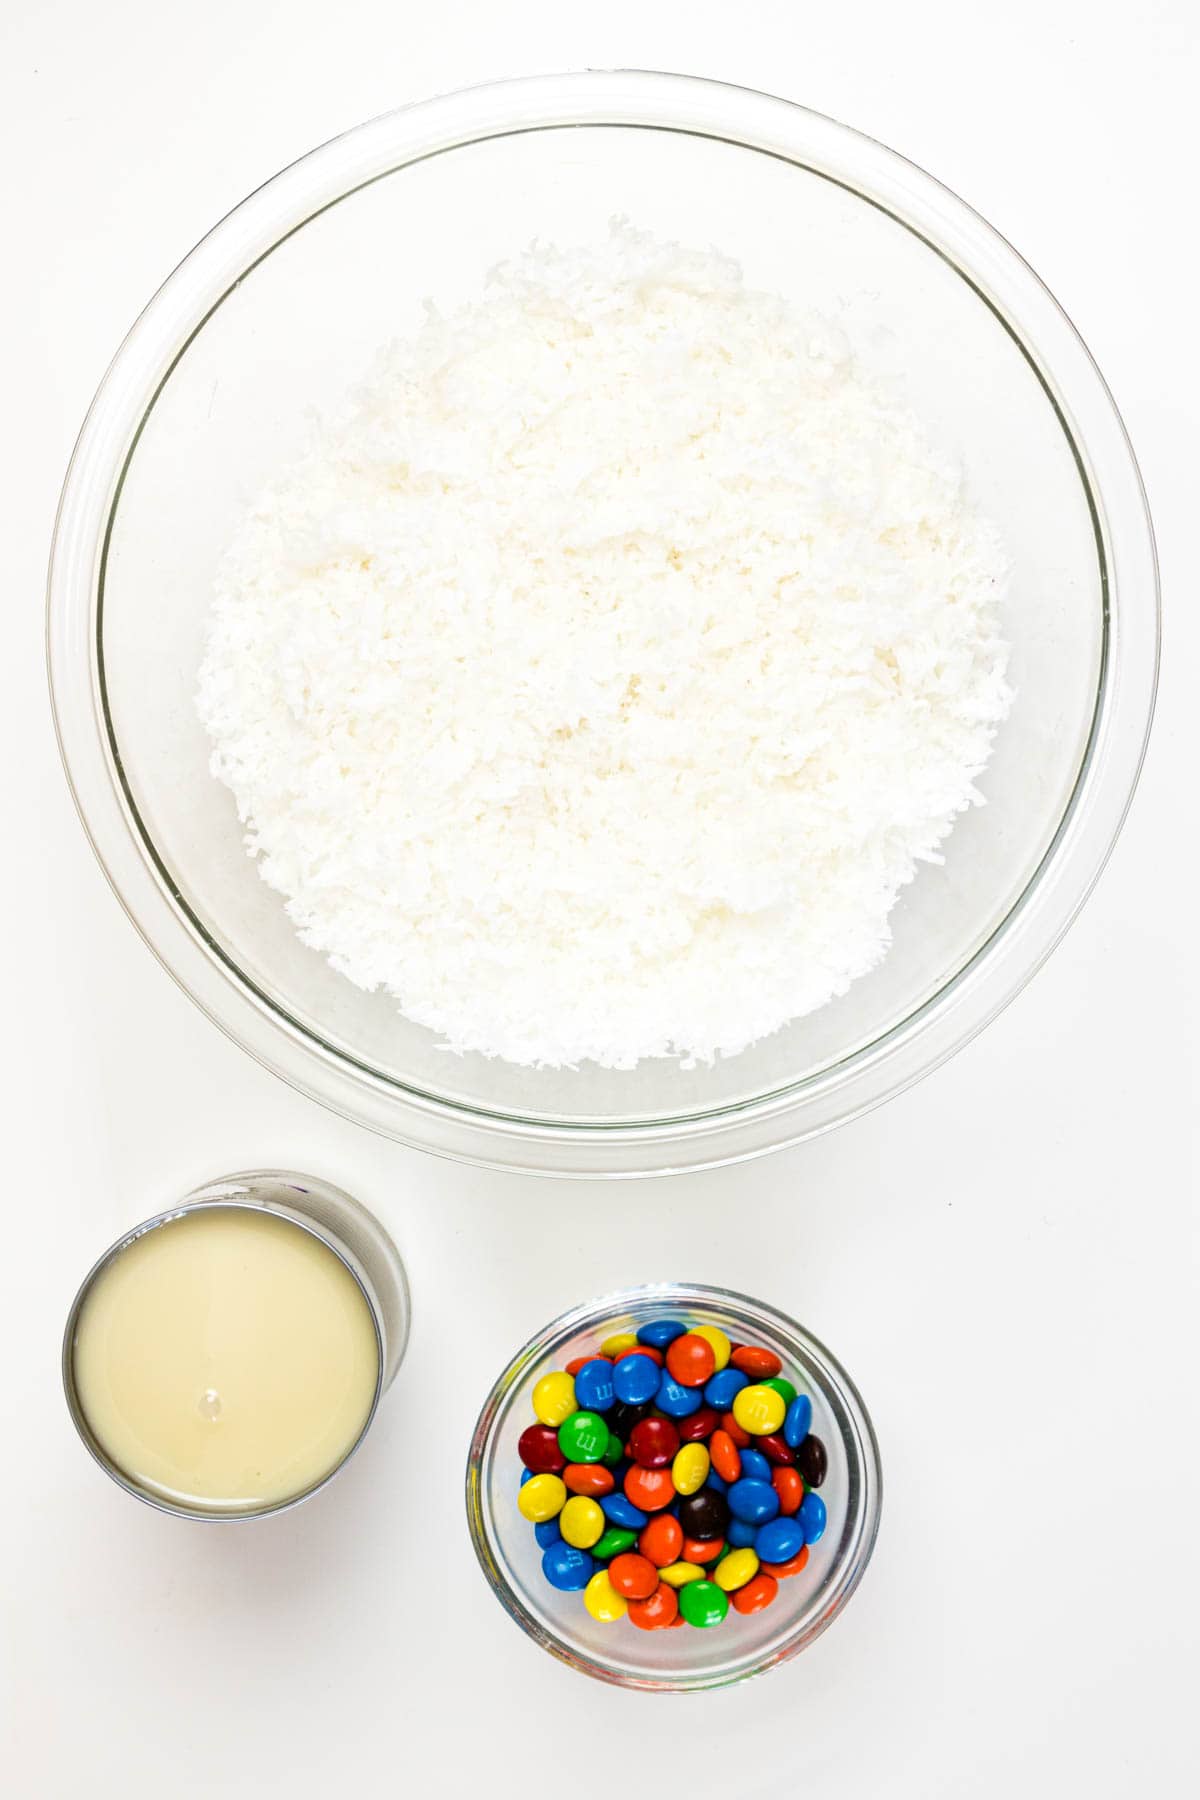 A bowl of shredded coconut, a can of sweetened condensed milk, and a bowl of M&M's.